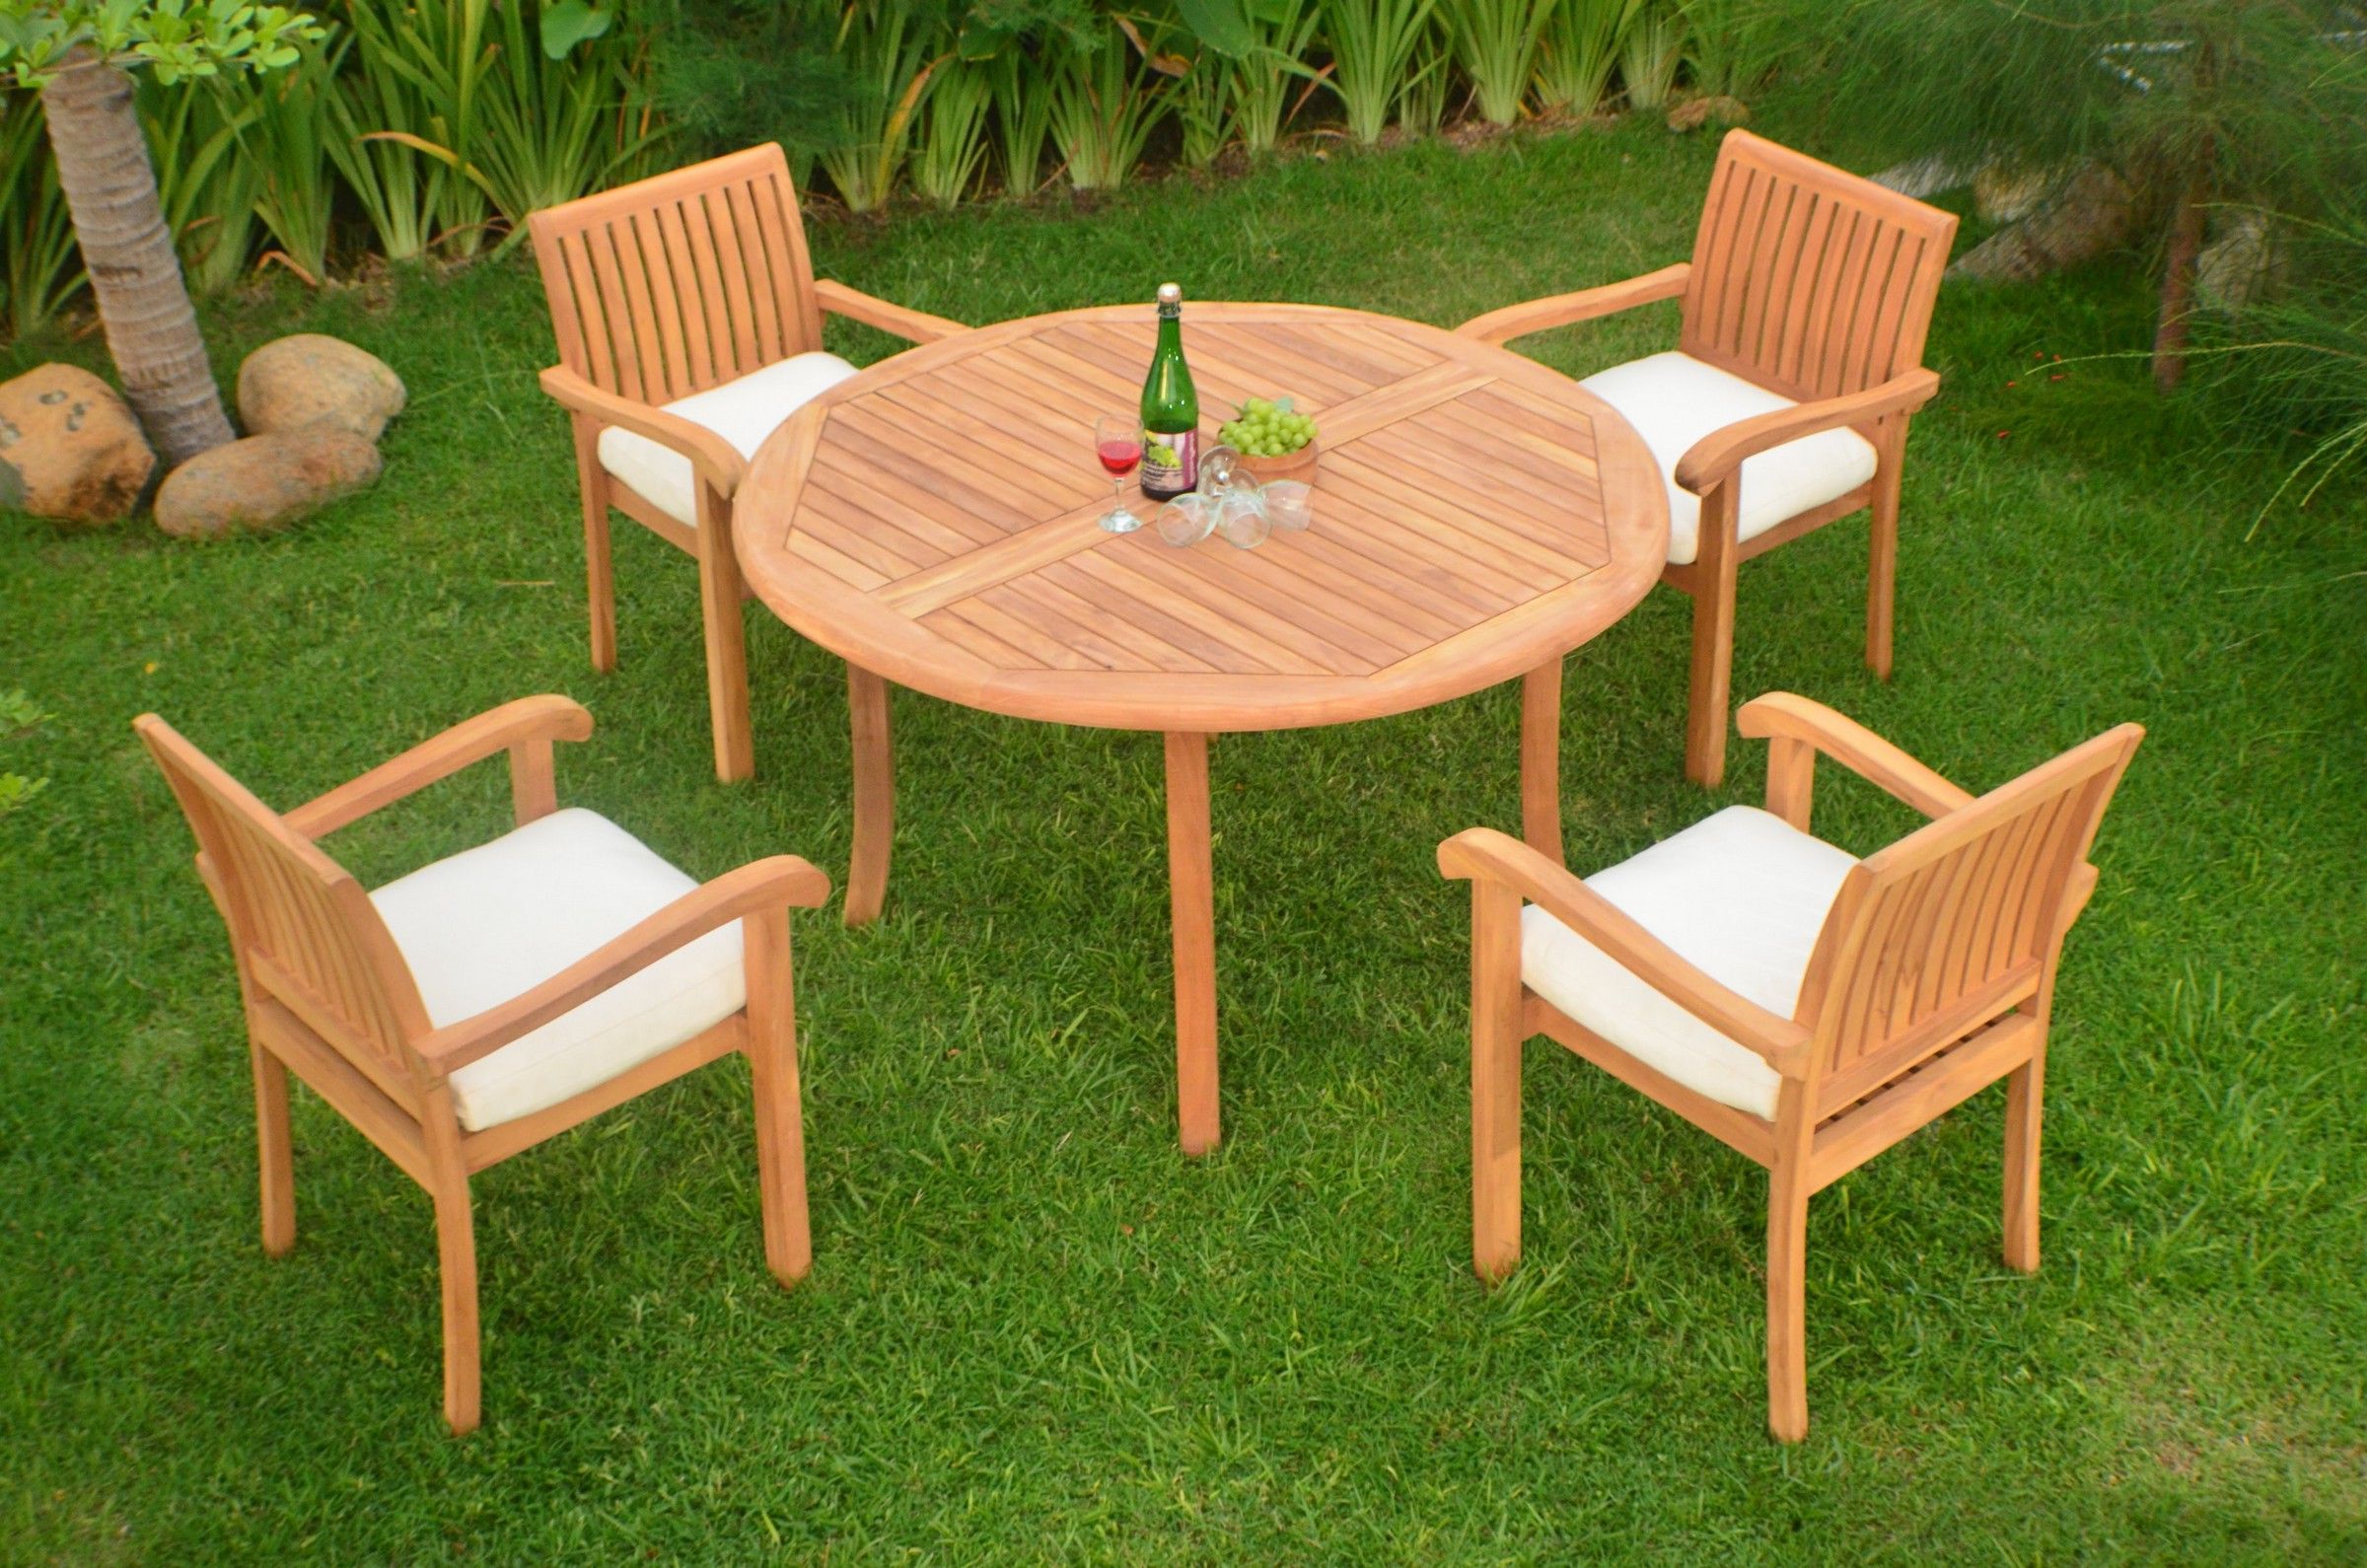 Teak Dining Set:4 Seater 5 Pc – 52" Round Table And 4 Stacking Napa Arm Inside Well Liked Teak Wood Outdoor Table And Chairs Sets (View 1 of 15)